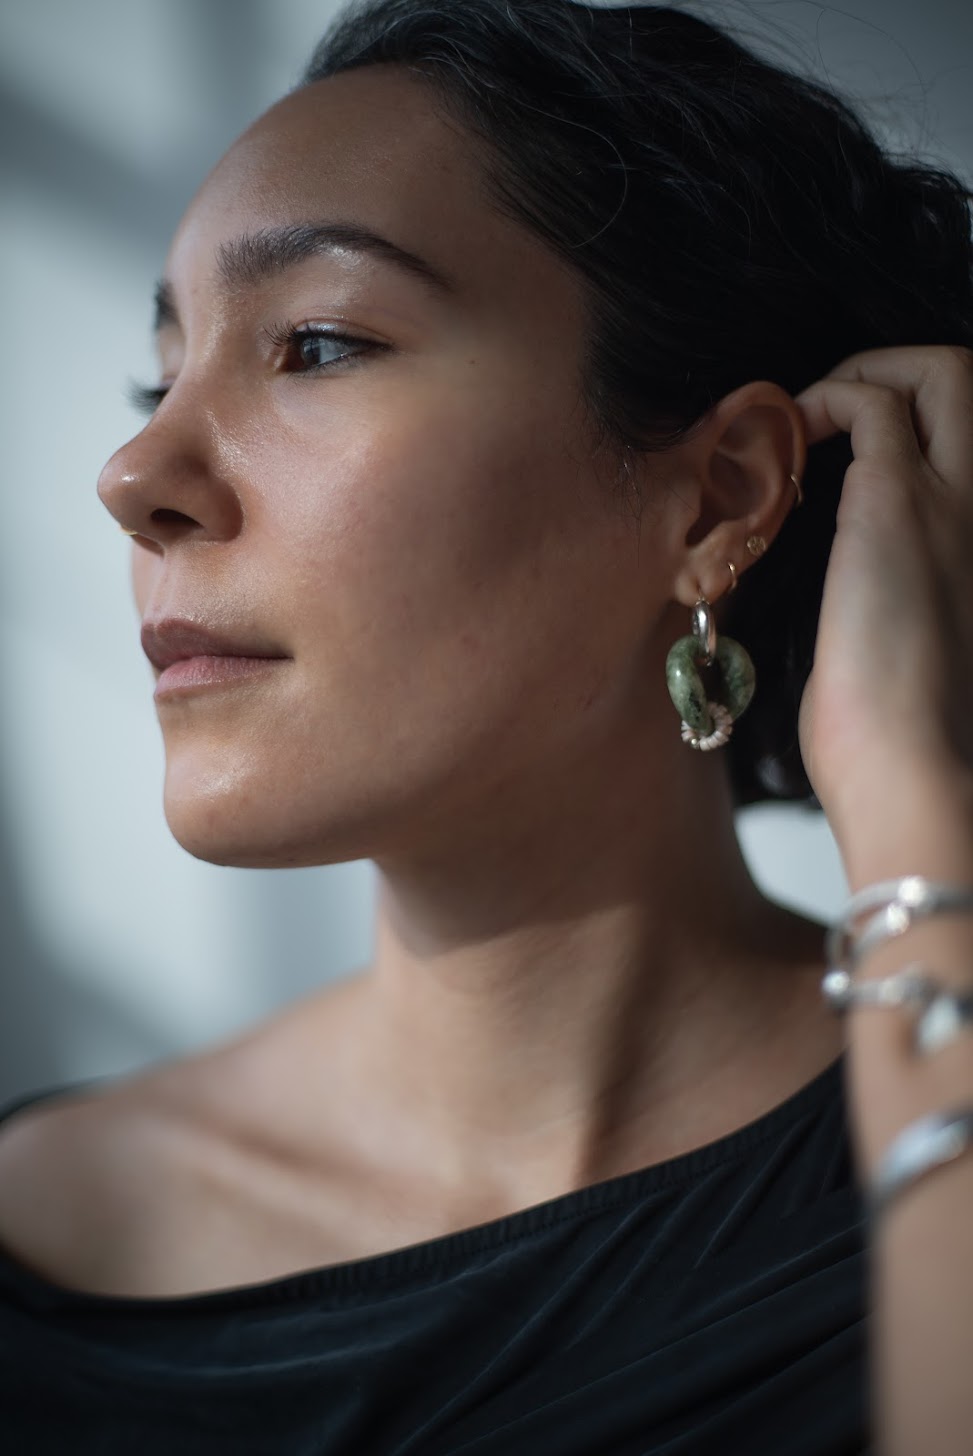 A photograph of India staring off to the right, gently pushing her short black hair behind her left ear. She is wearing gold, silver, and stone-based earrings, silver bangles on her left arm, and a charcoal dress.